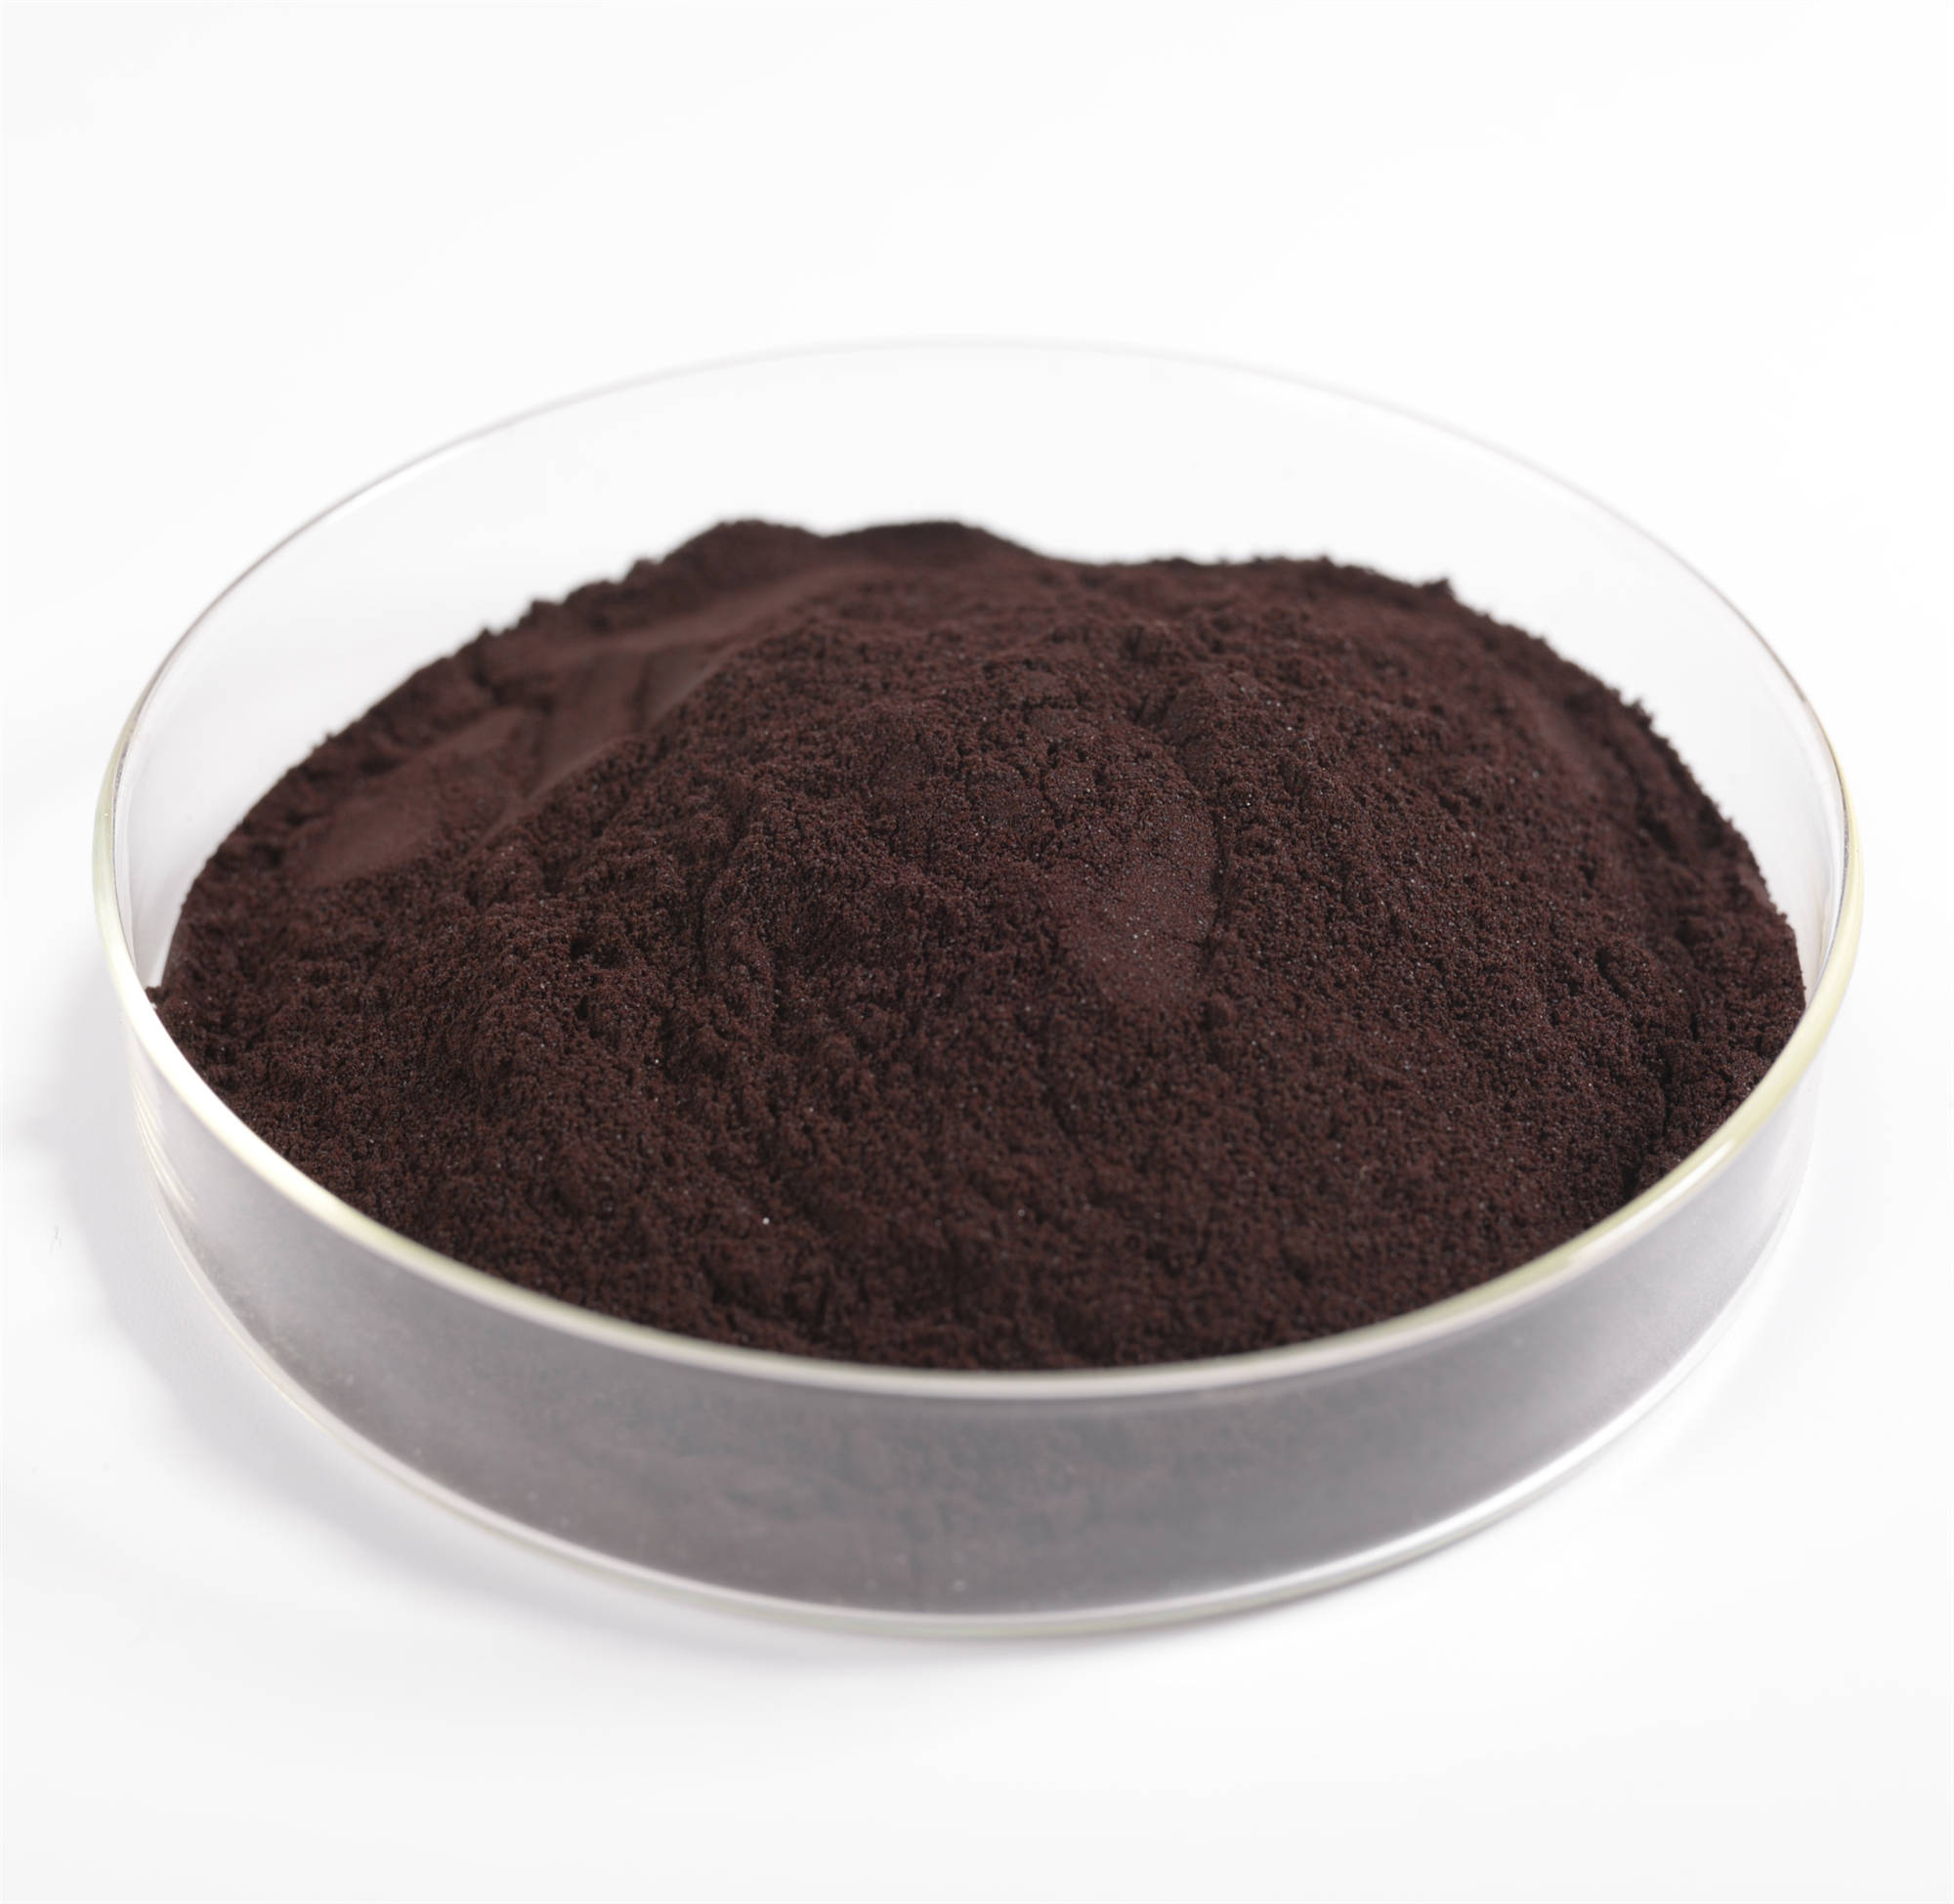 COCOA SEED EXTRACT